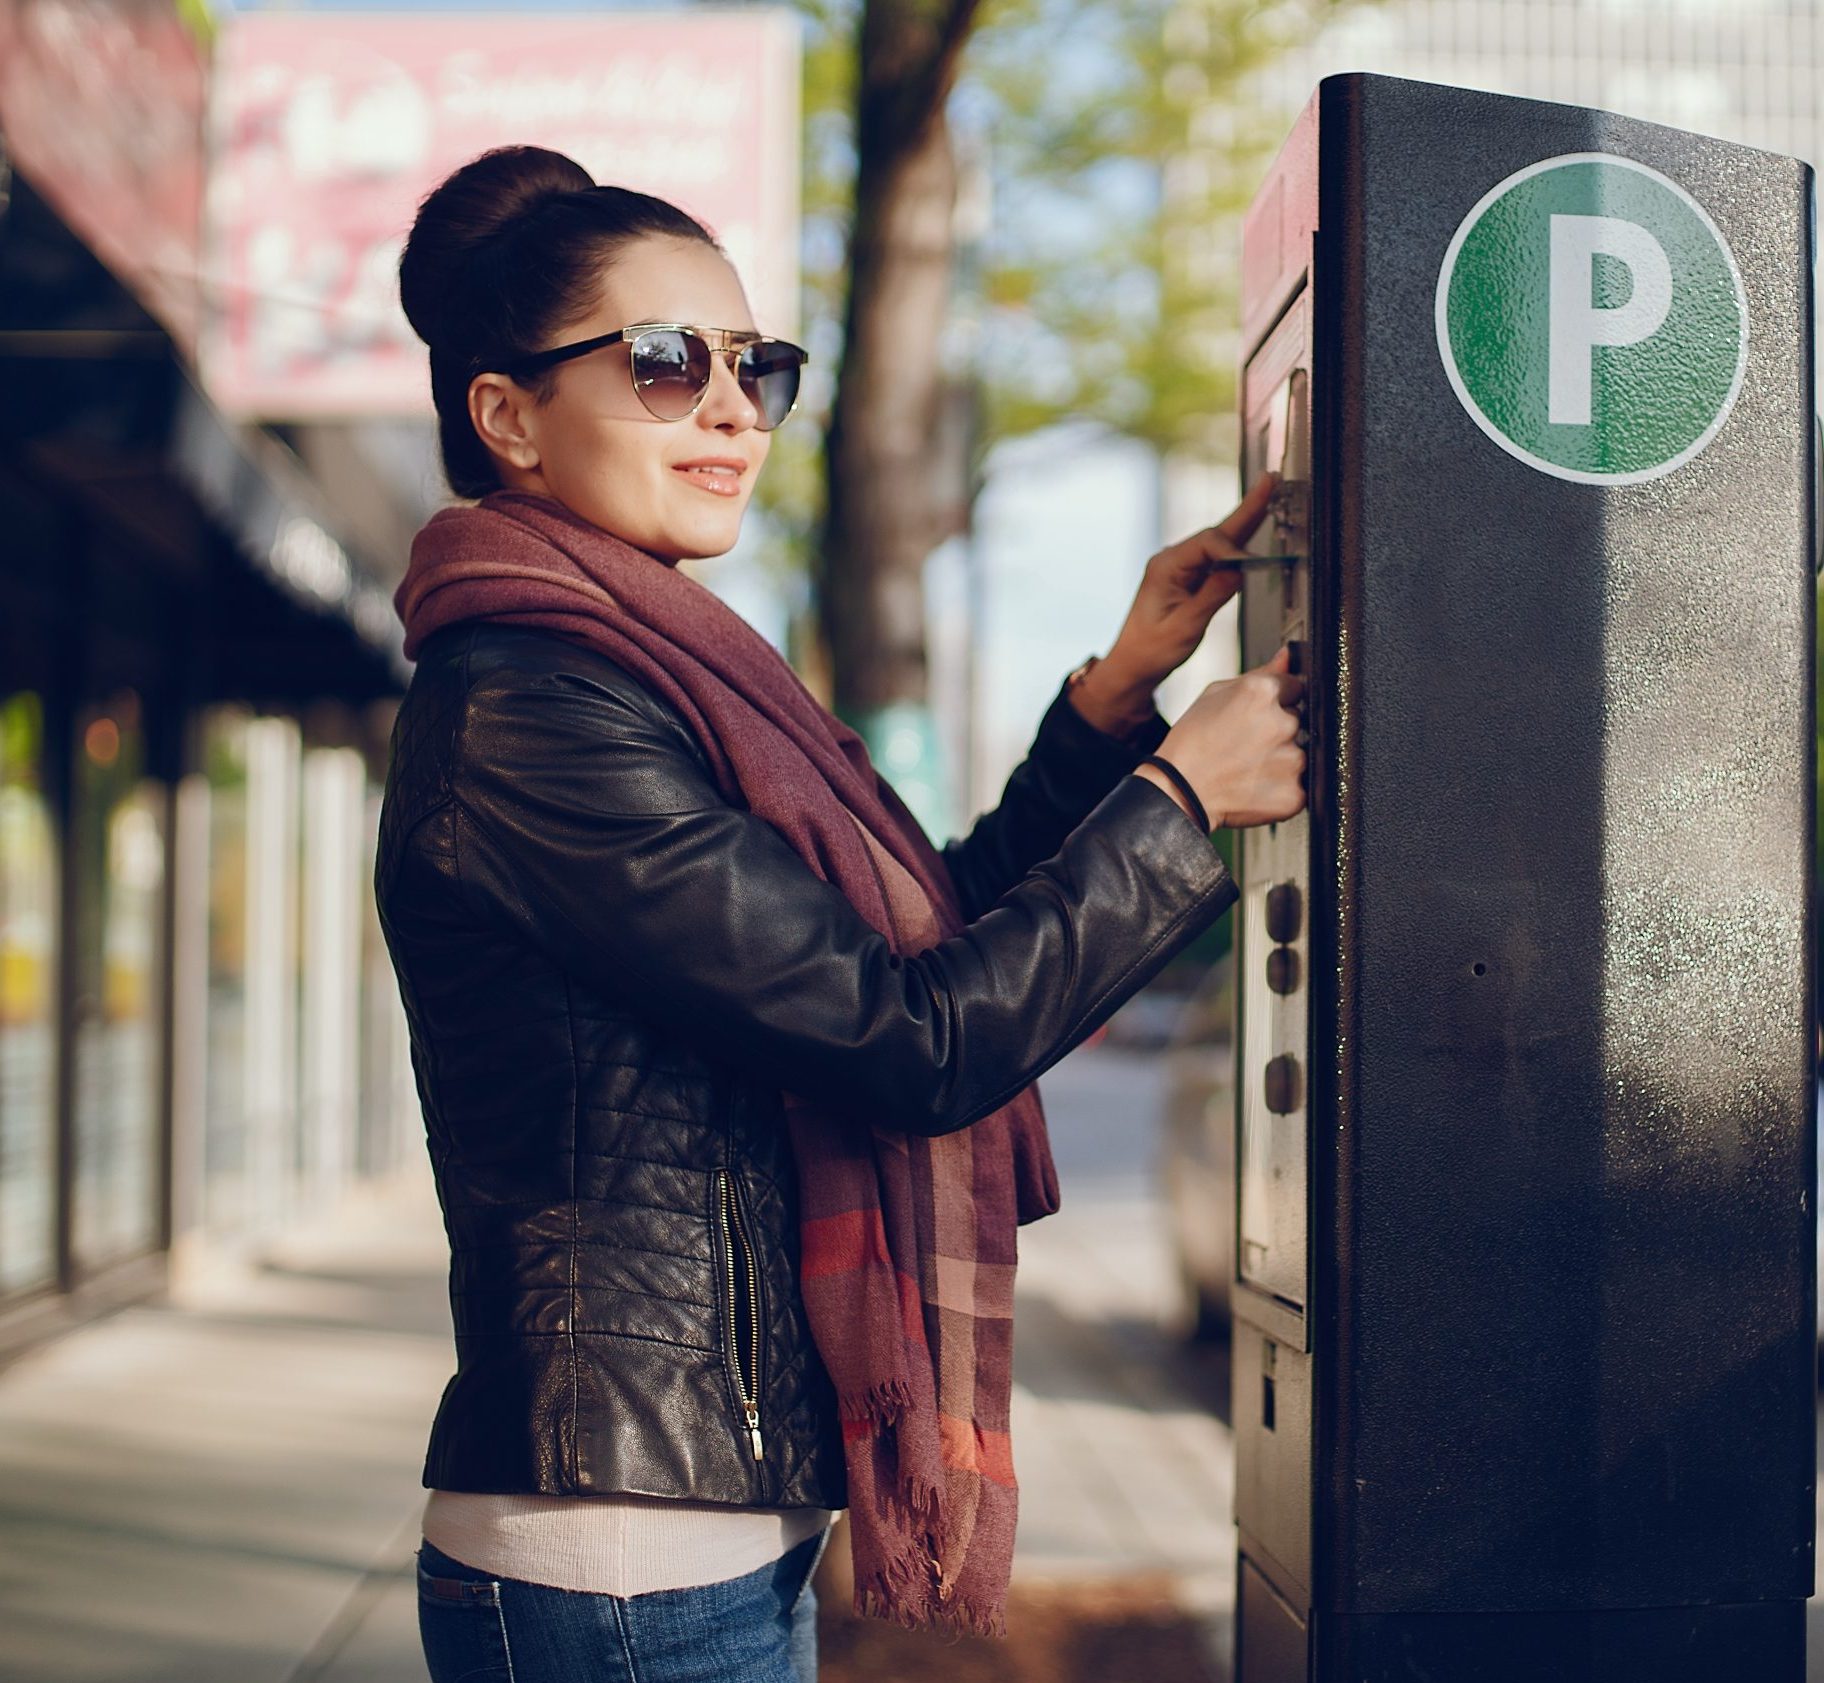 Parking Payment Devices: 4 Questions to Ask image